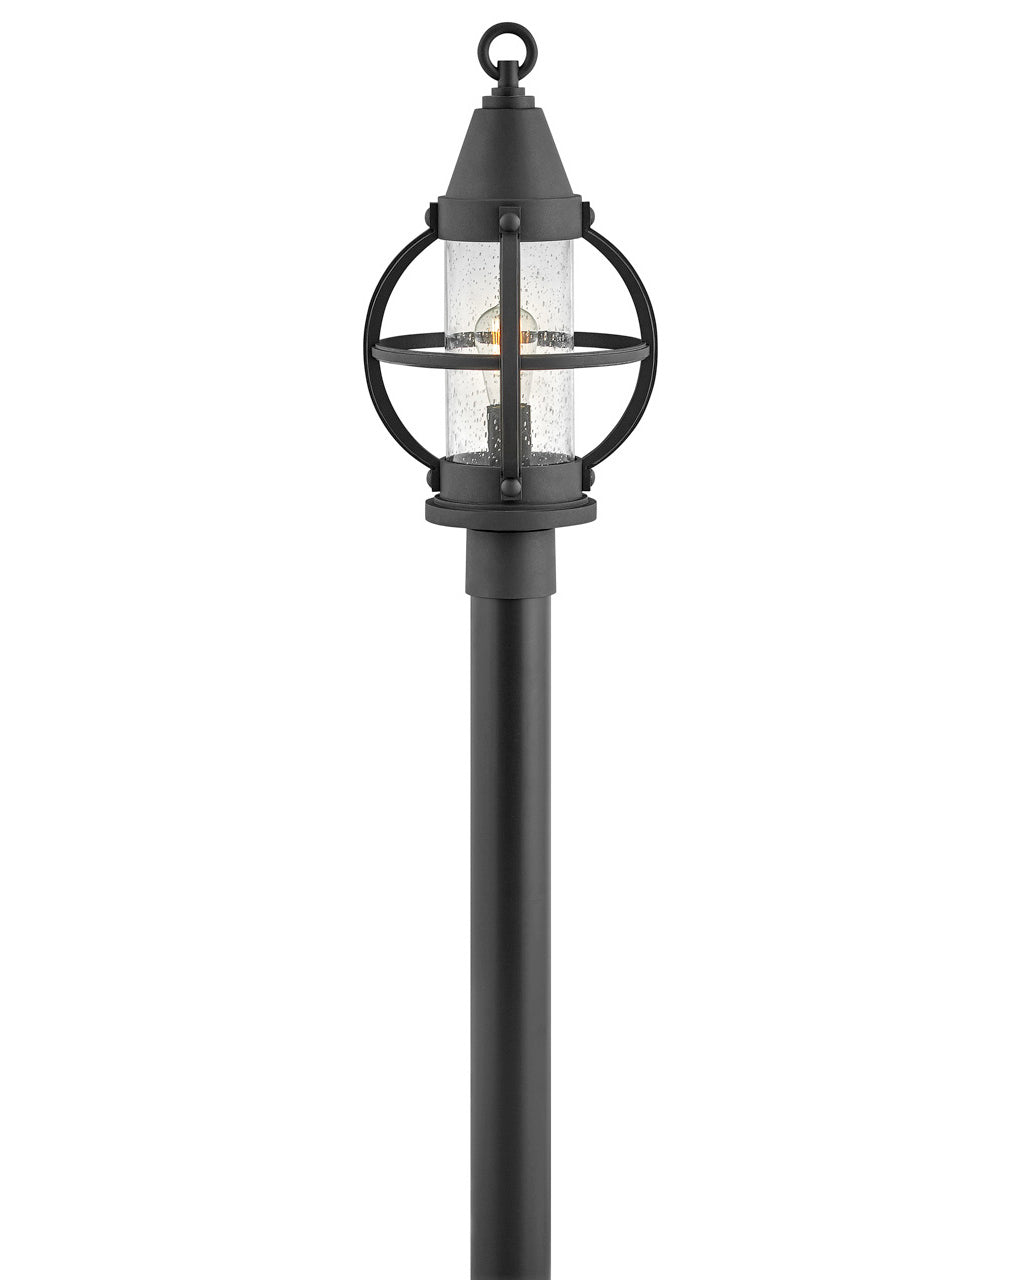 OUTDOOR CHATHAM Post Top or Pier Mount Lantern